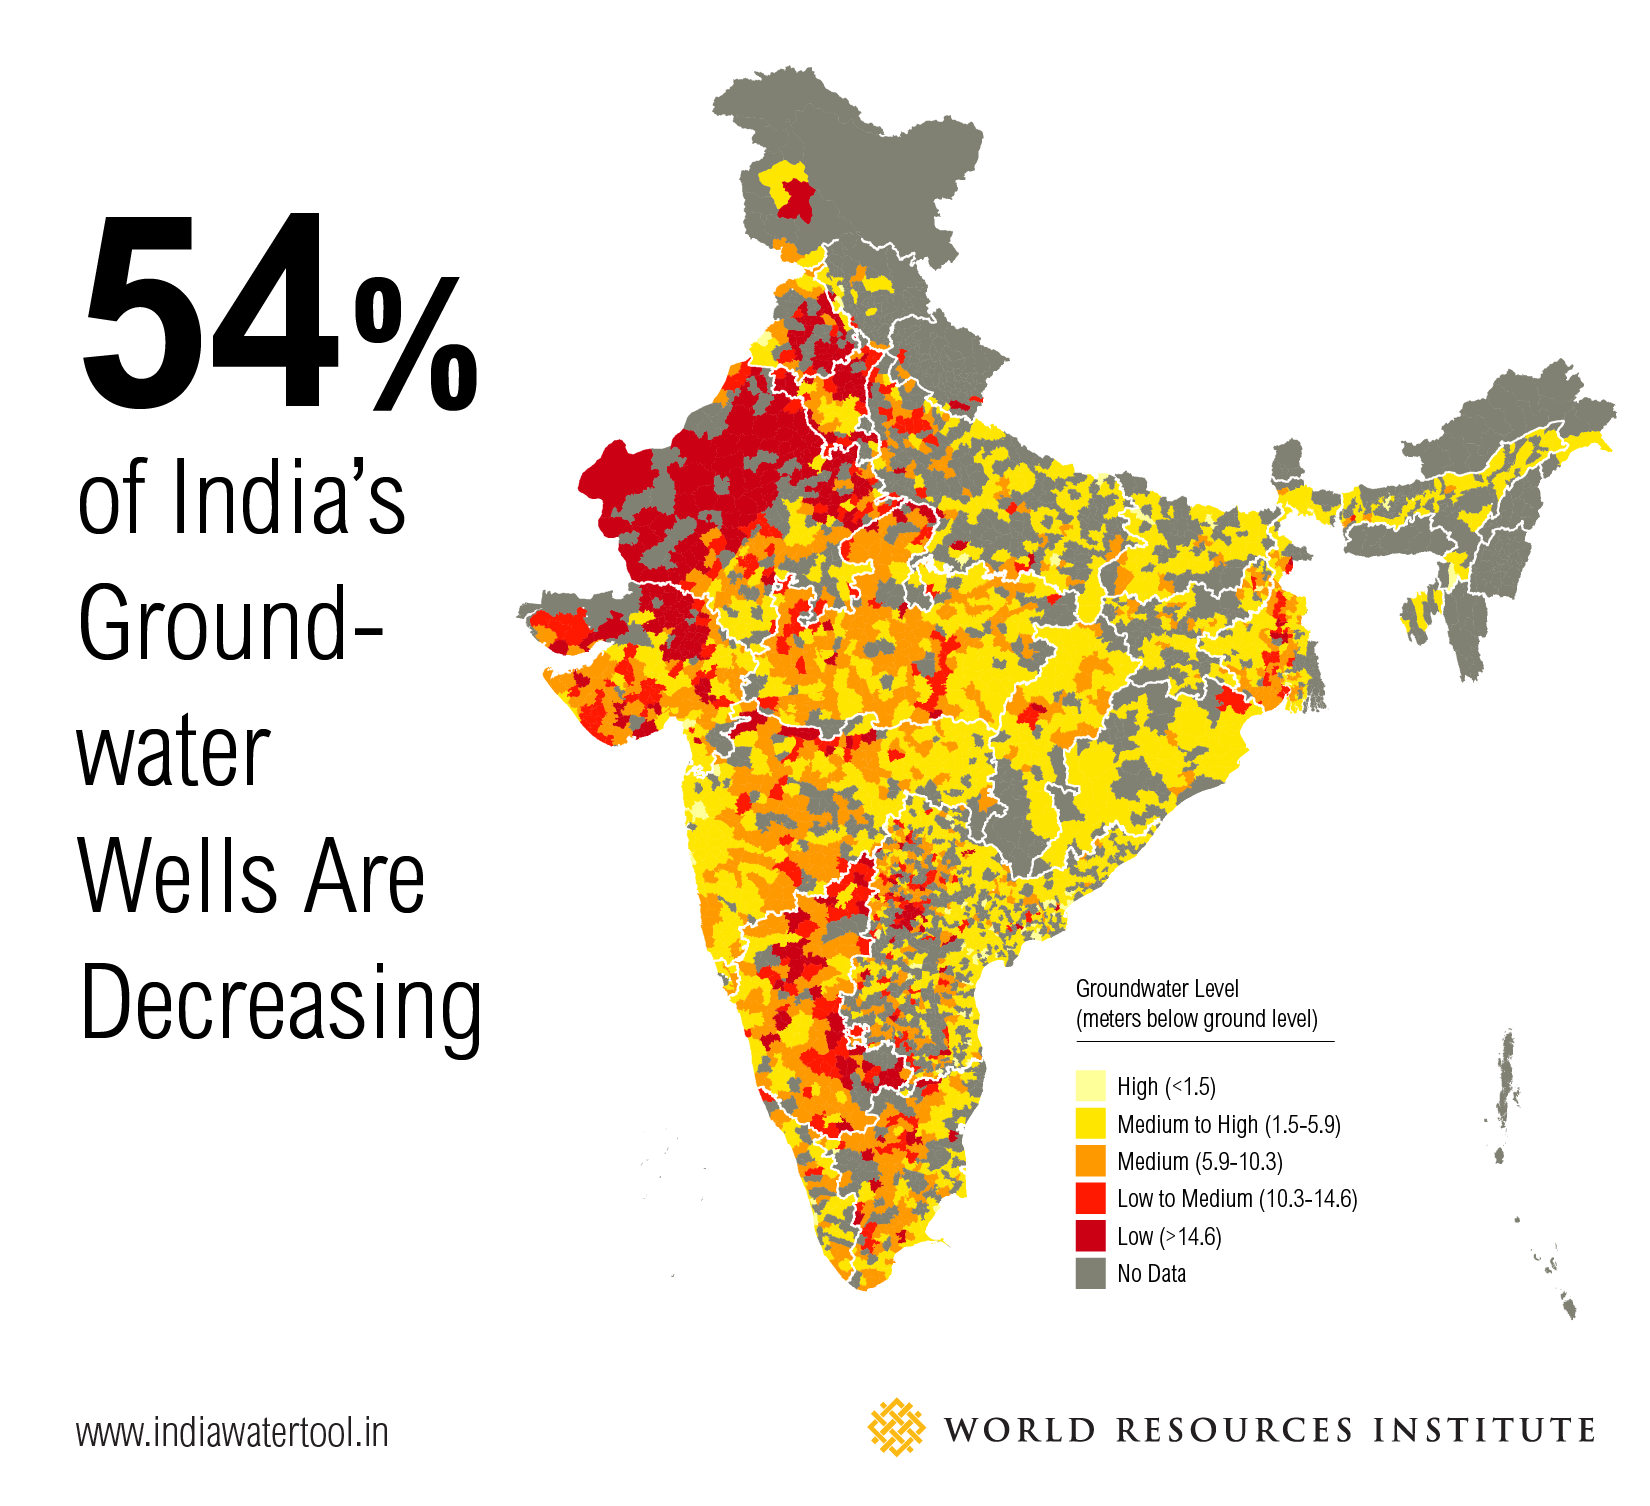 http://www.wri.org/blog/2015/02/3-maps-explain-india’s-growing-water-risks